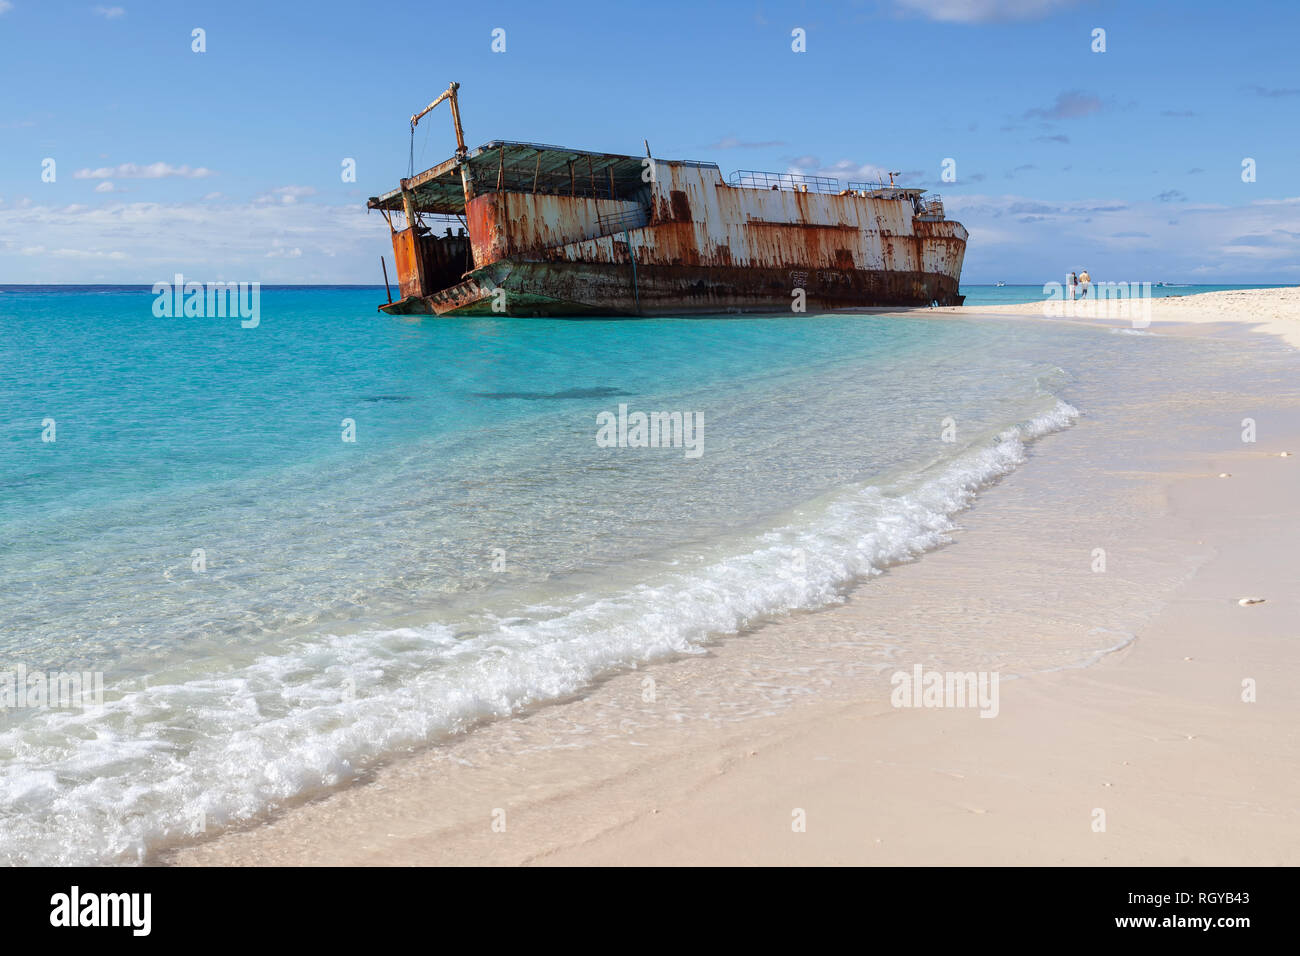 Shipwreck on Turks and Caicos Islands in the Caribbean Stock Photo